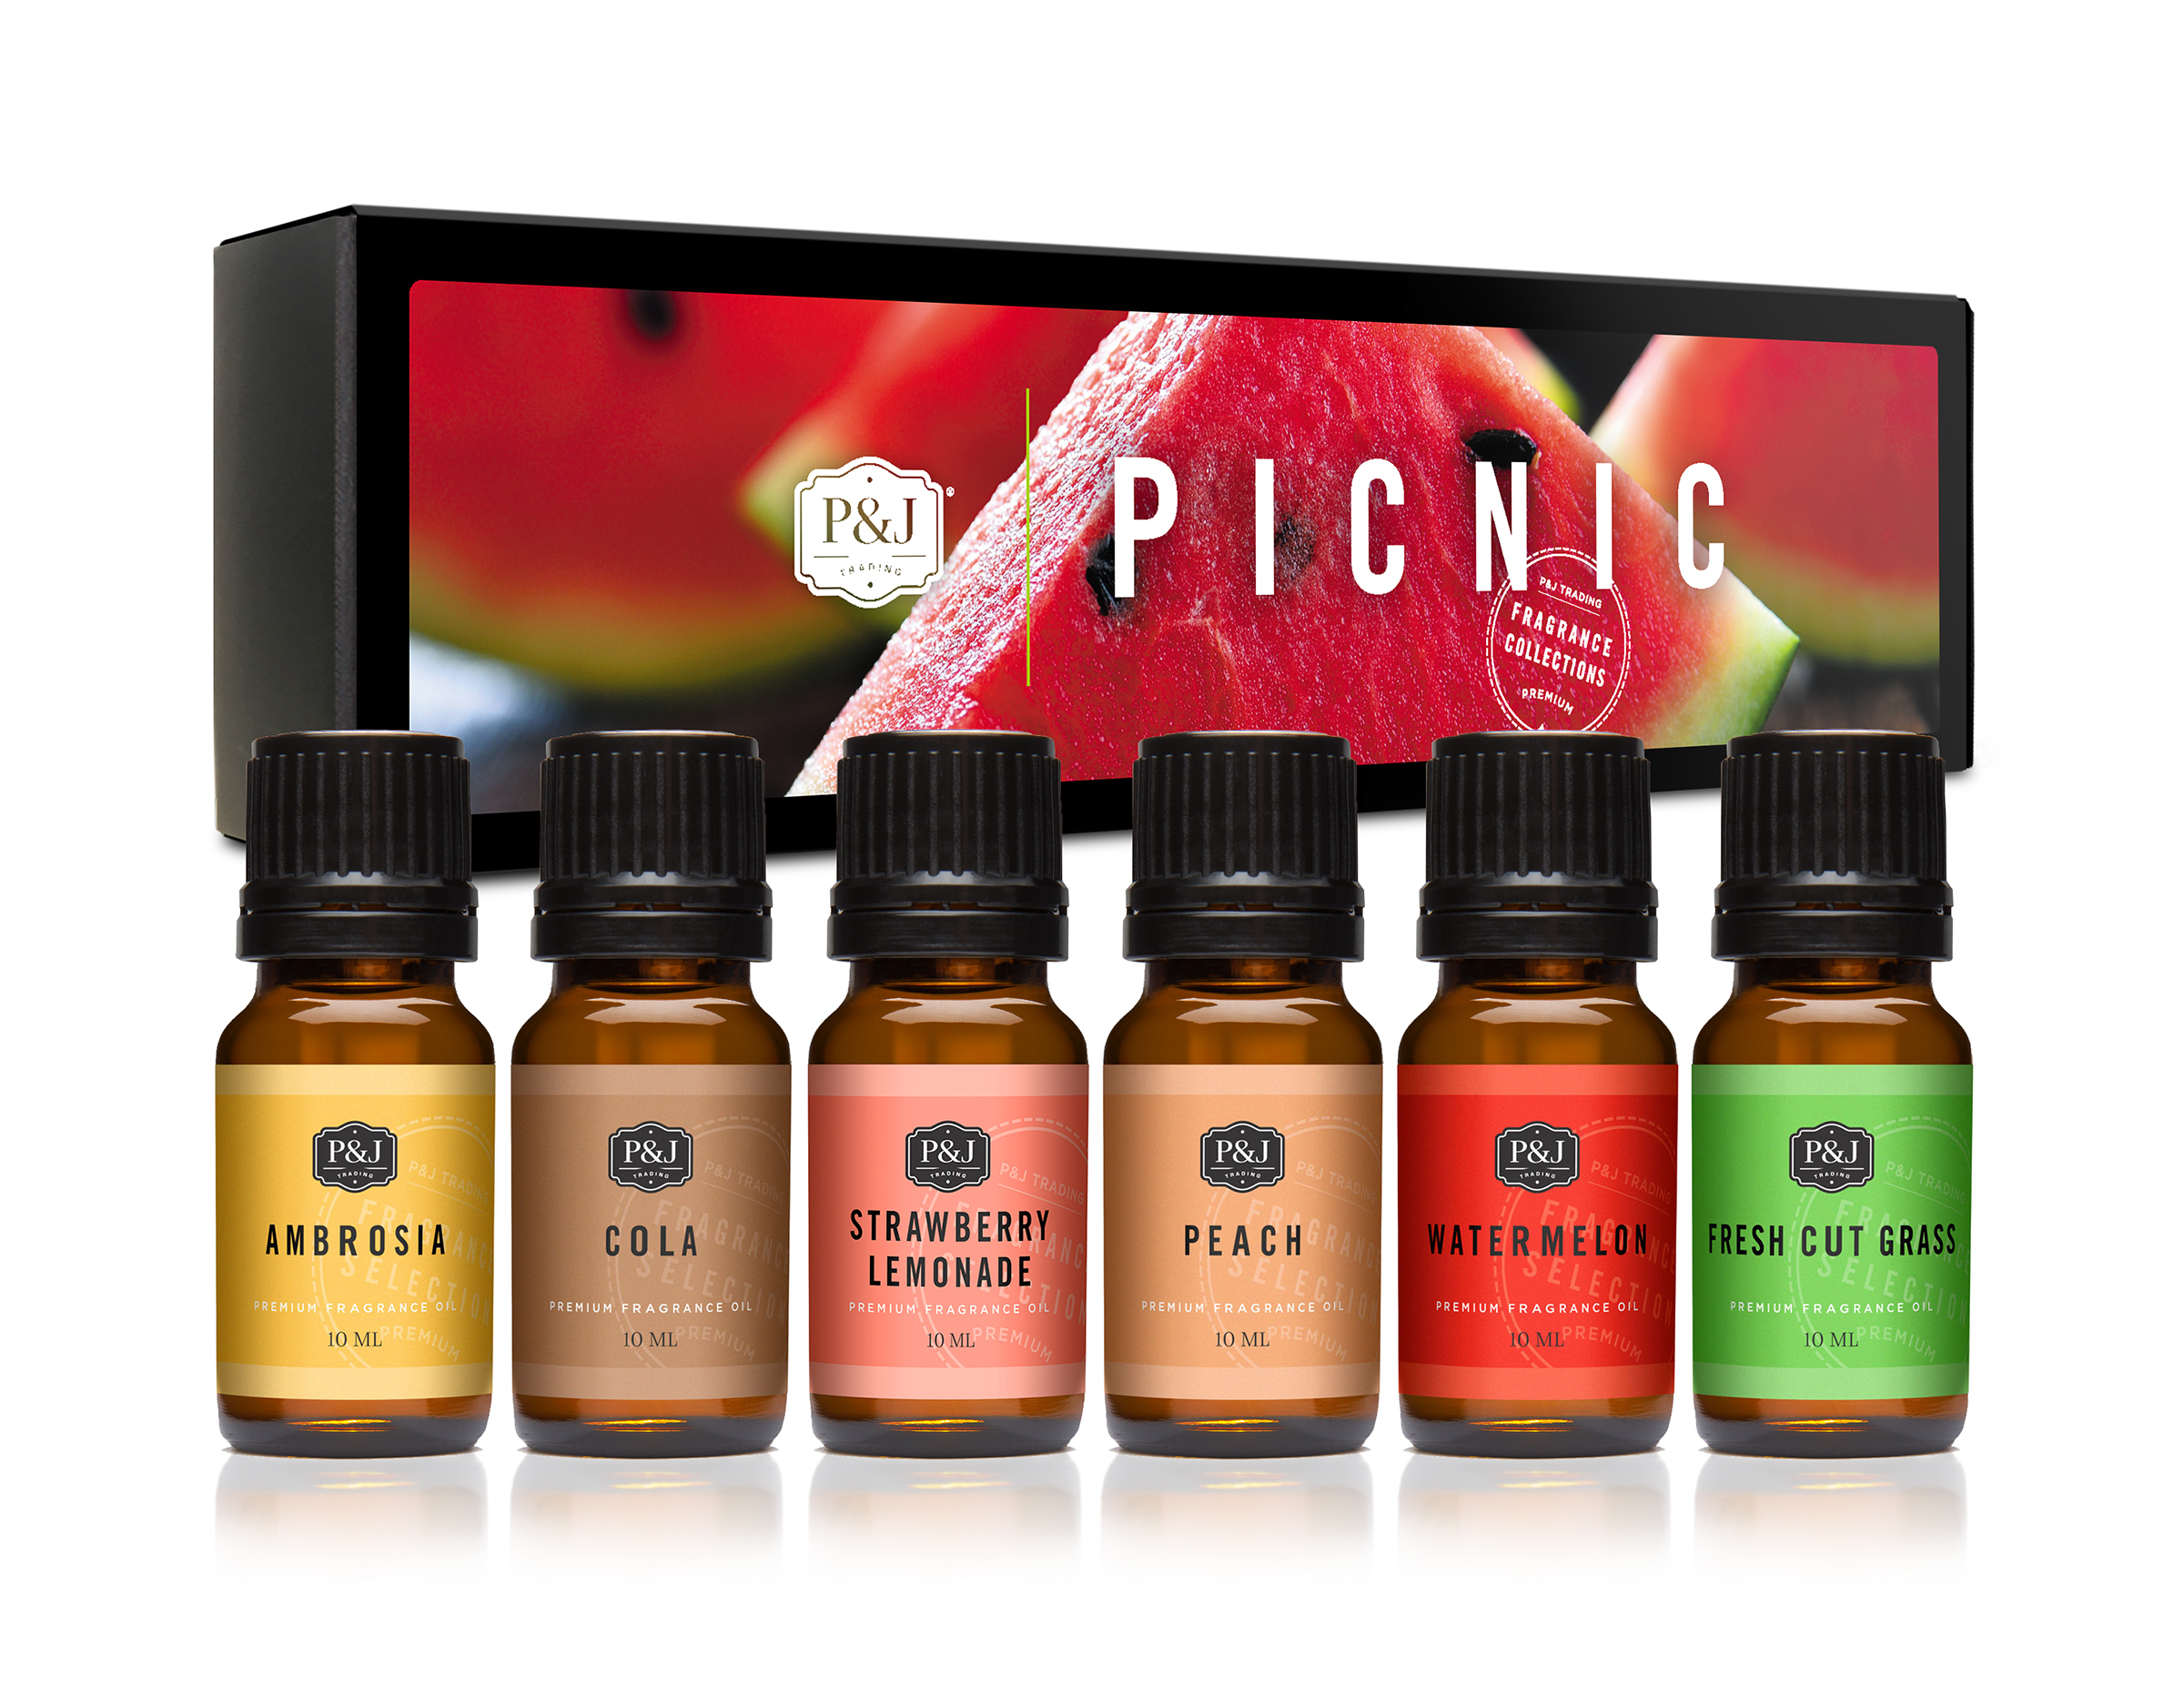 P&J Picnic Set of 6 Premium Fragrance Oil for Candle Making & Soap